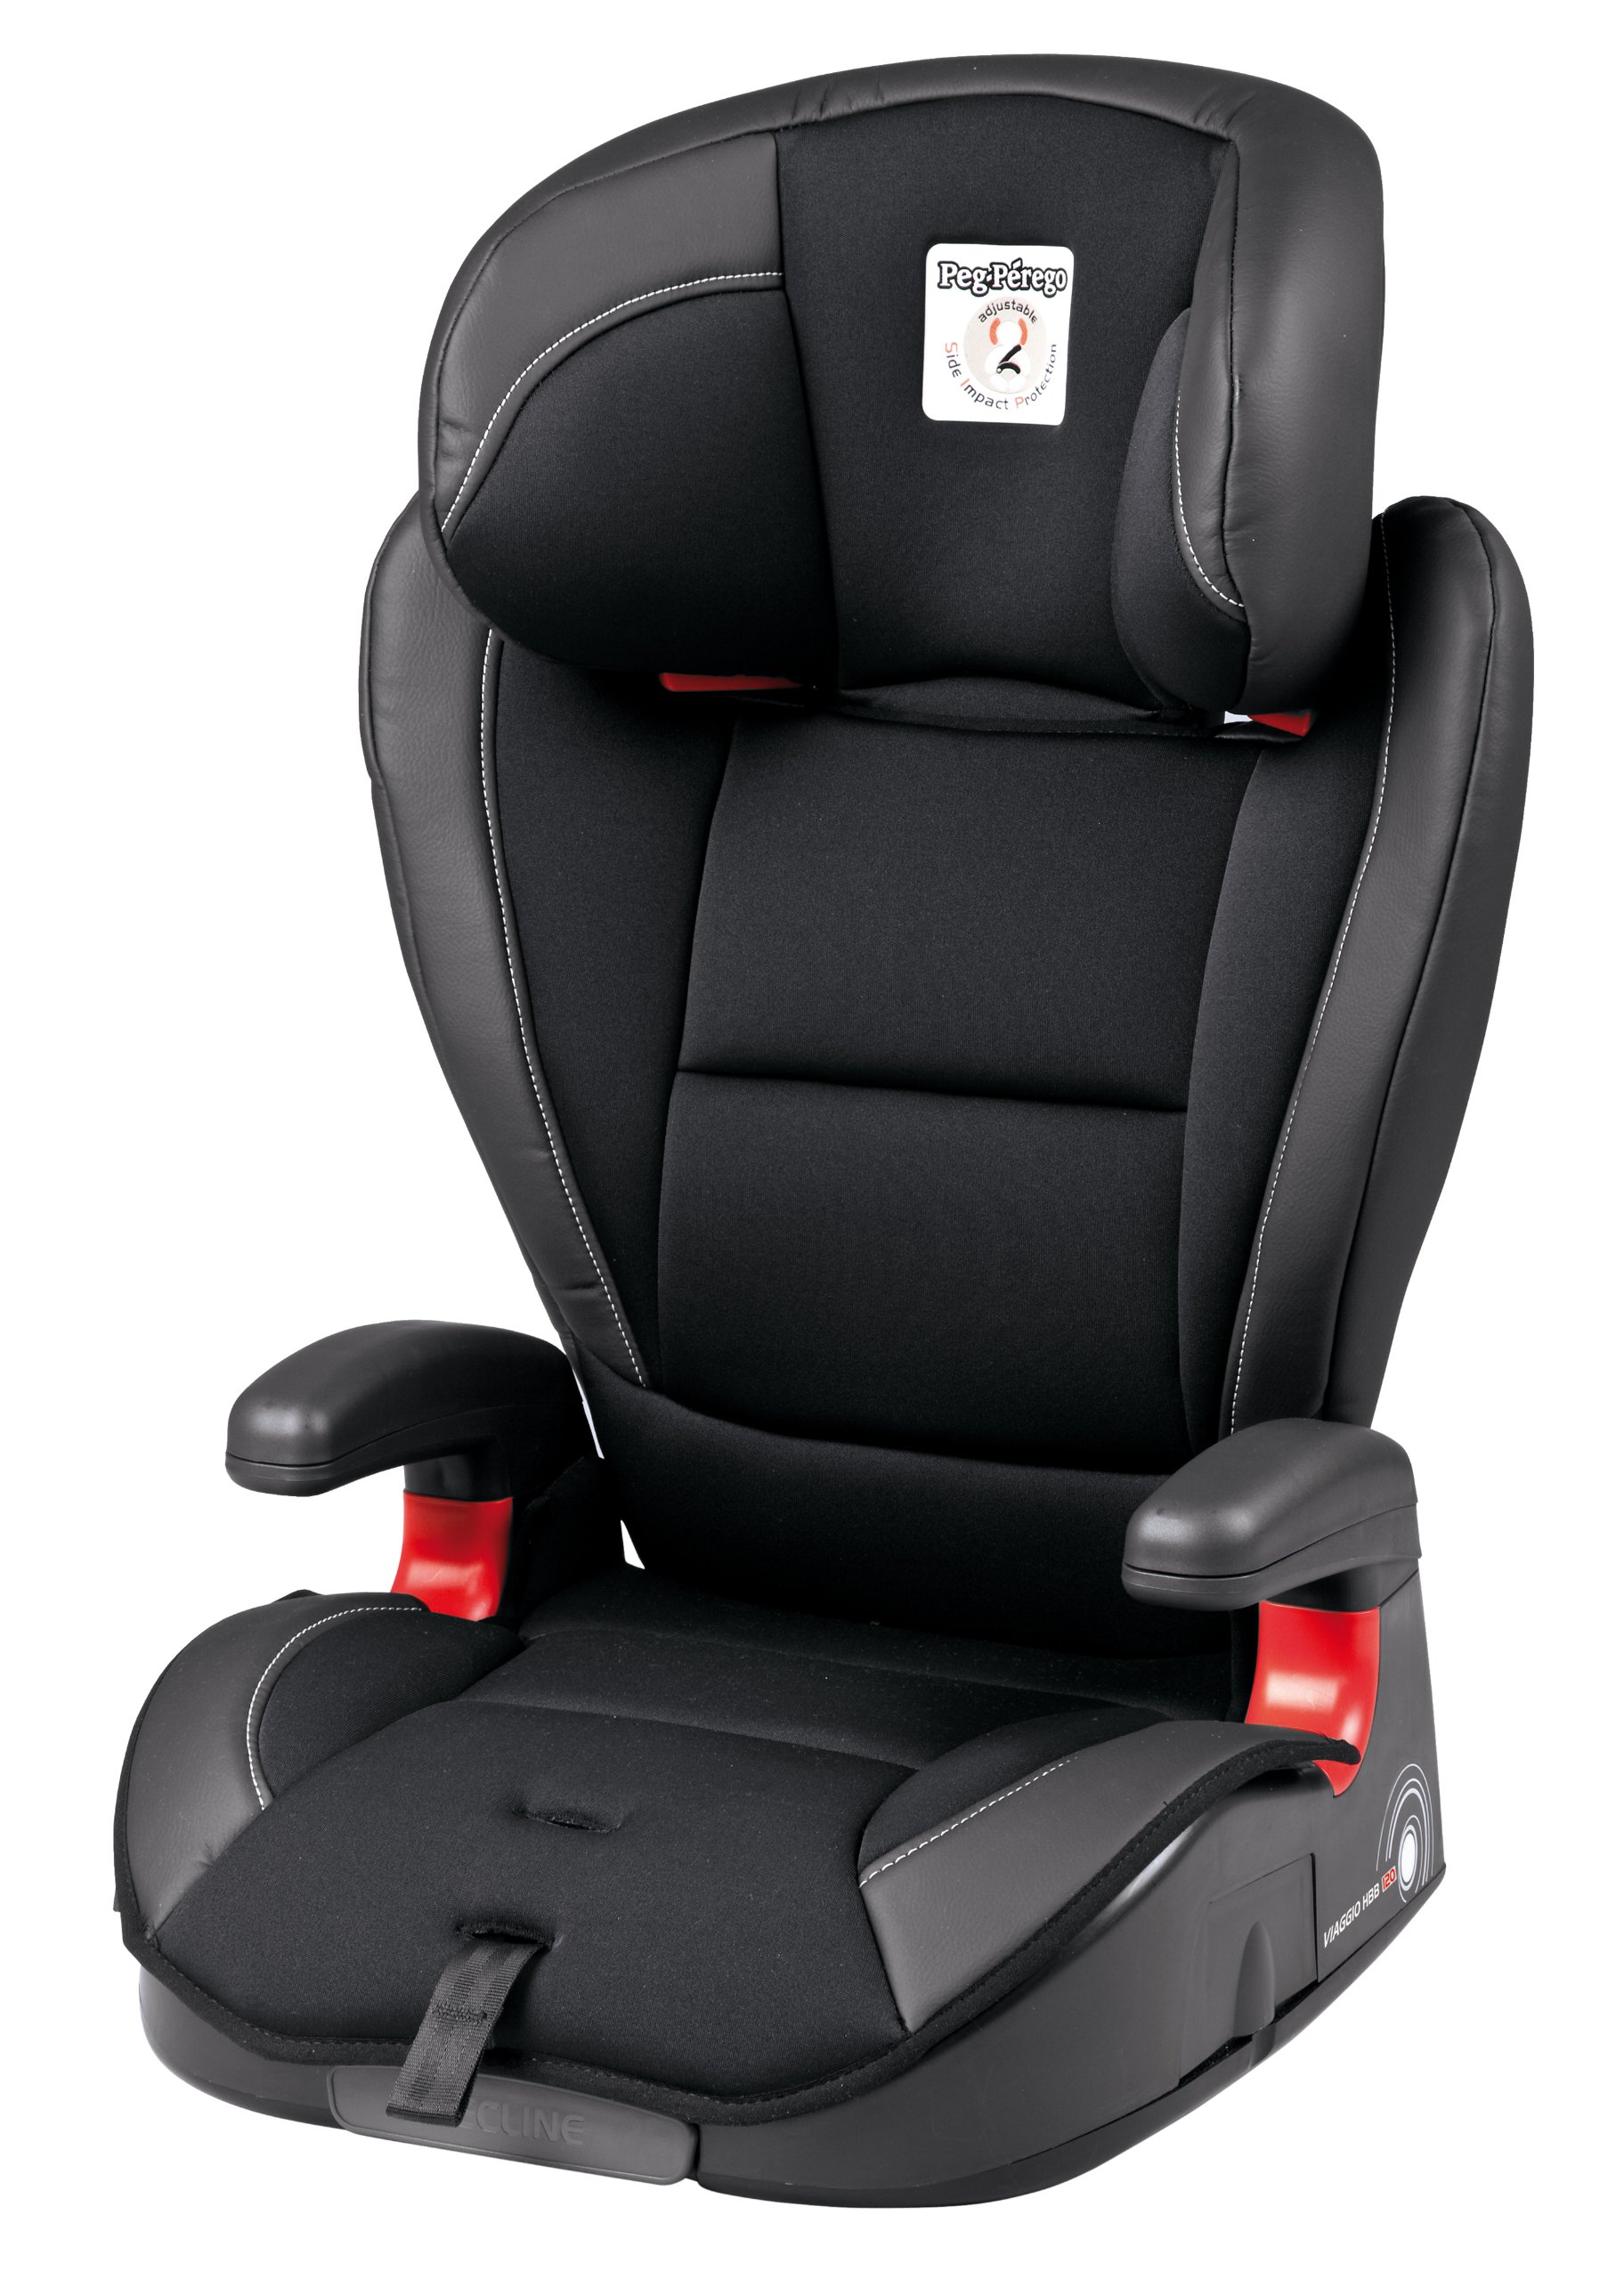 Peg Perego Viaggio HBB 120 - Booster Car Seat - for Children from 40 to 120 lbs - Made in Italy - Licorice (Black)